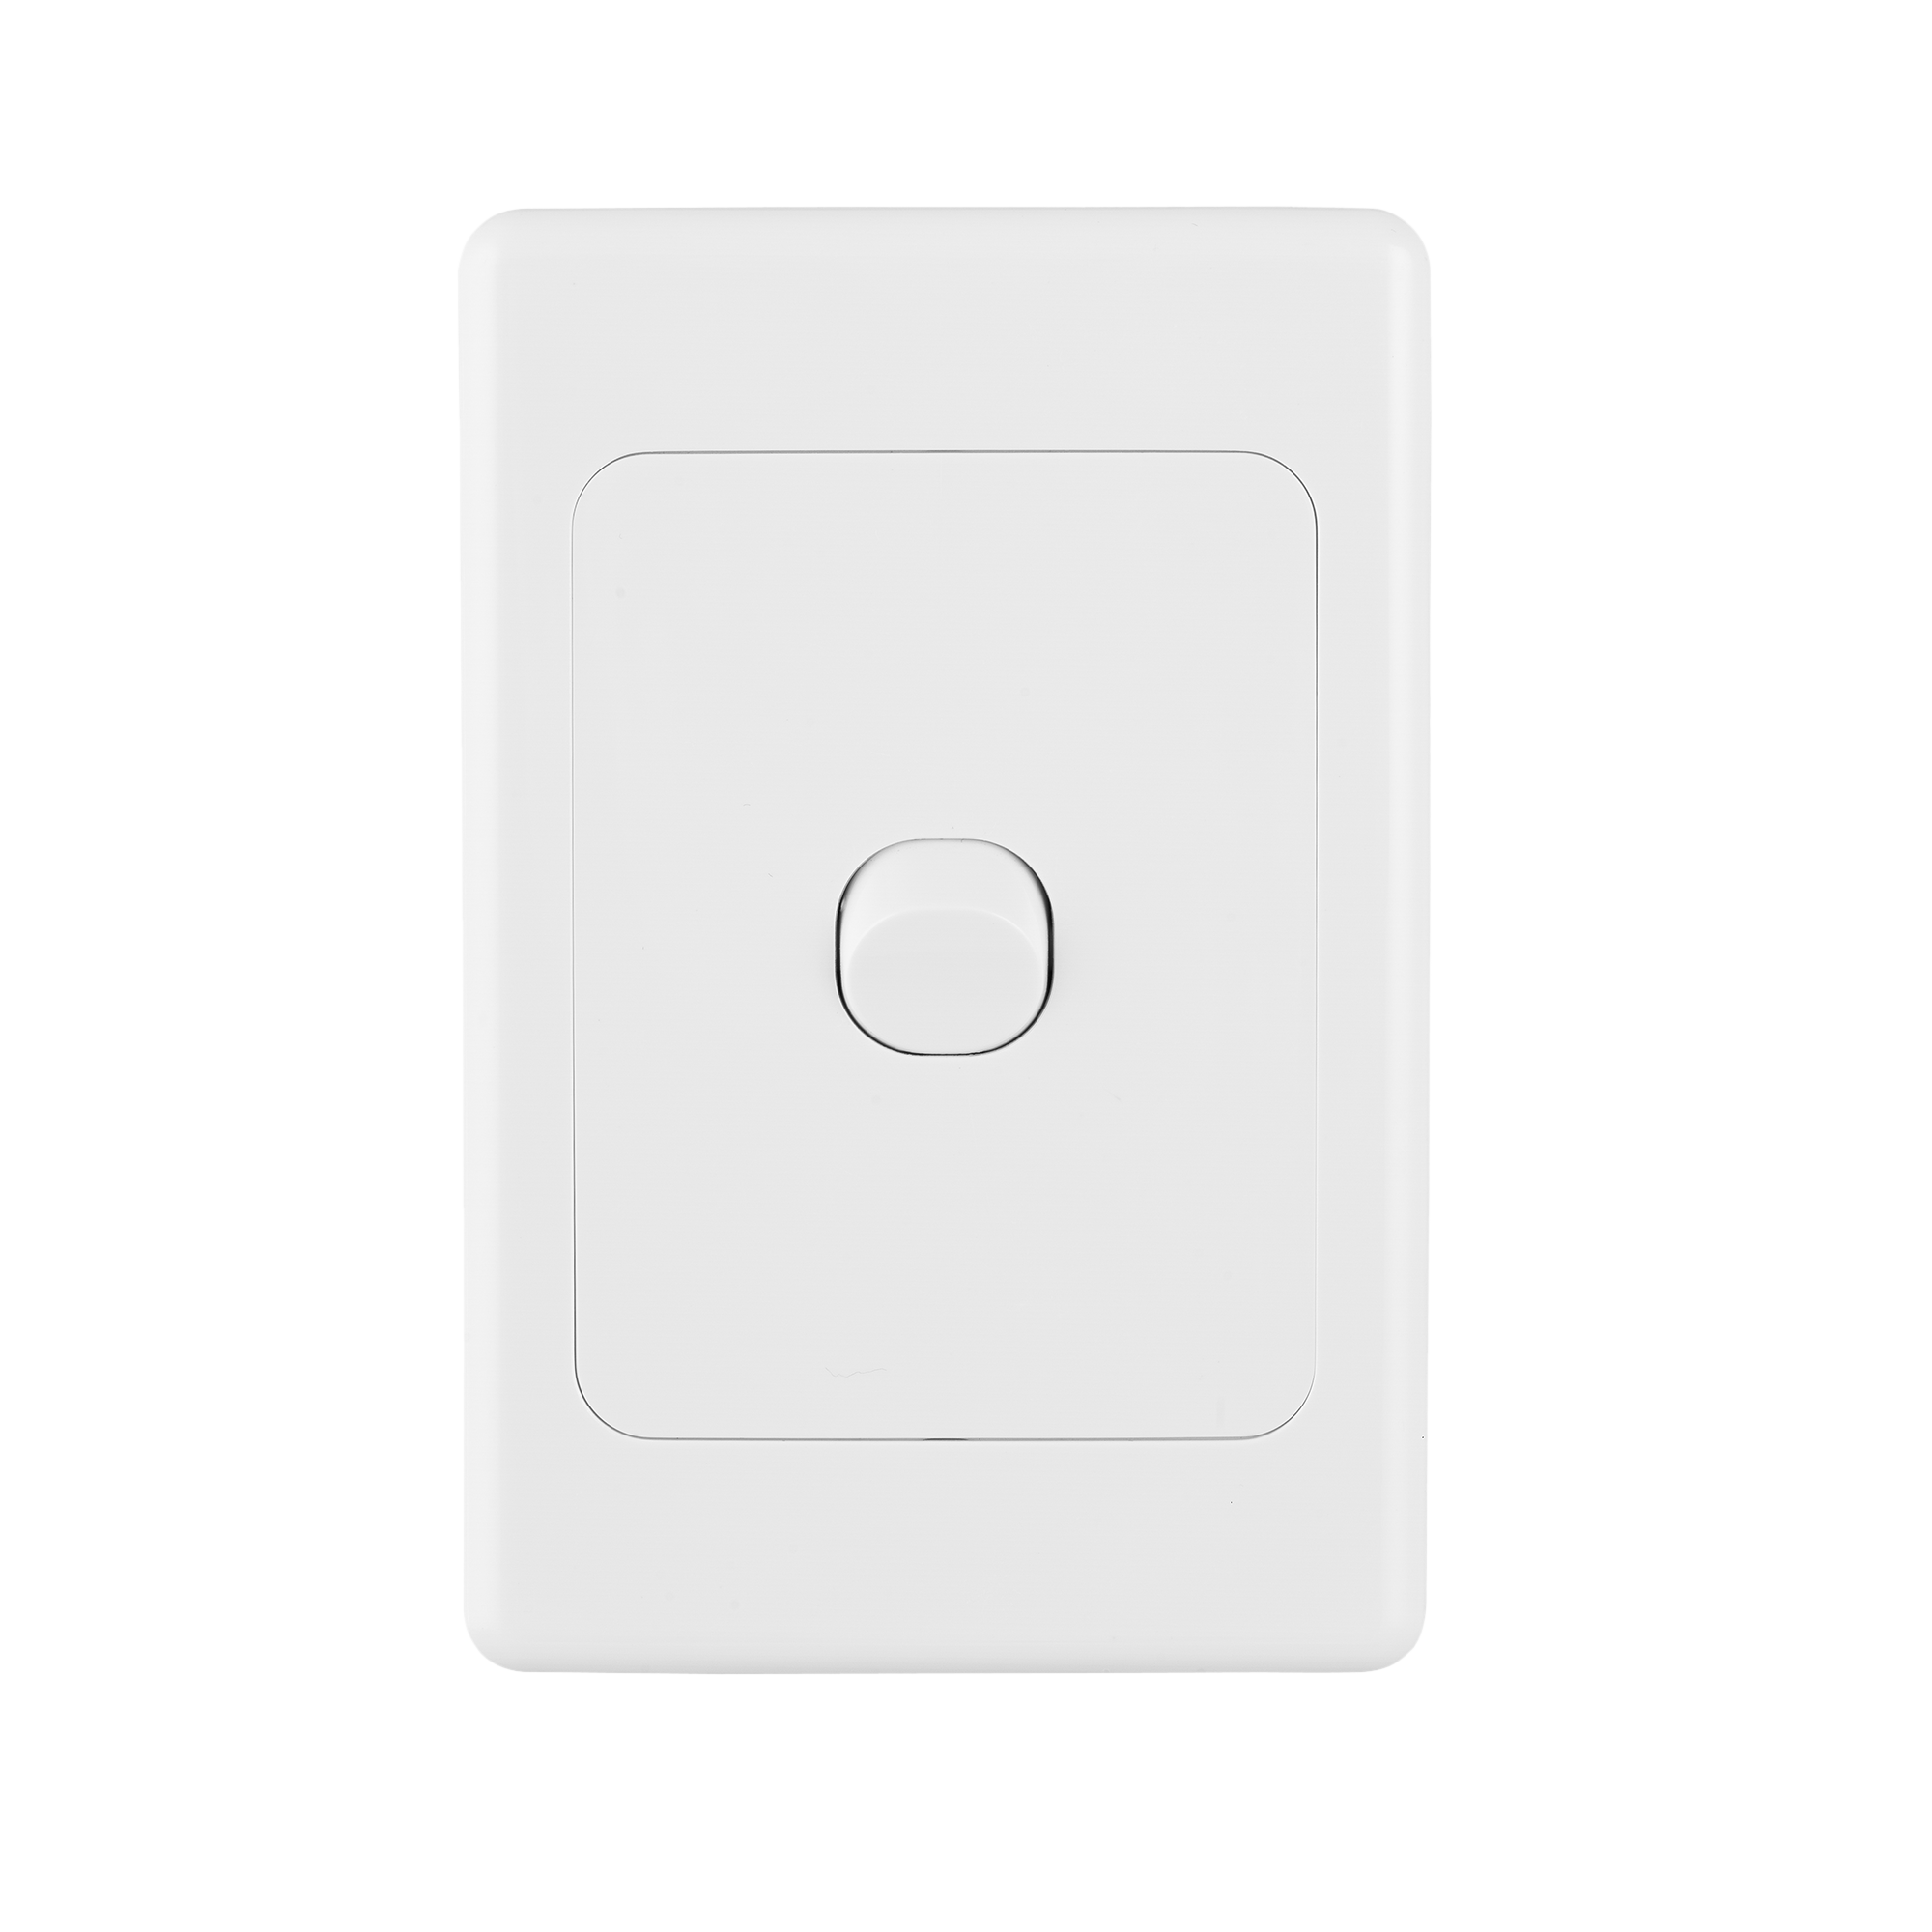  S-line vertical wall switch